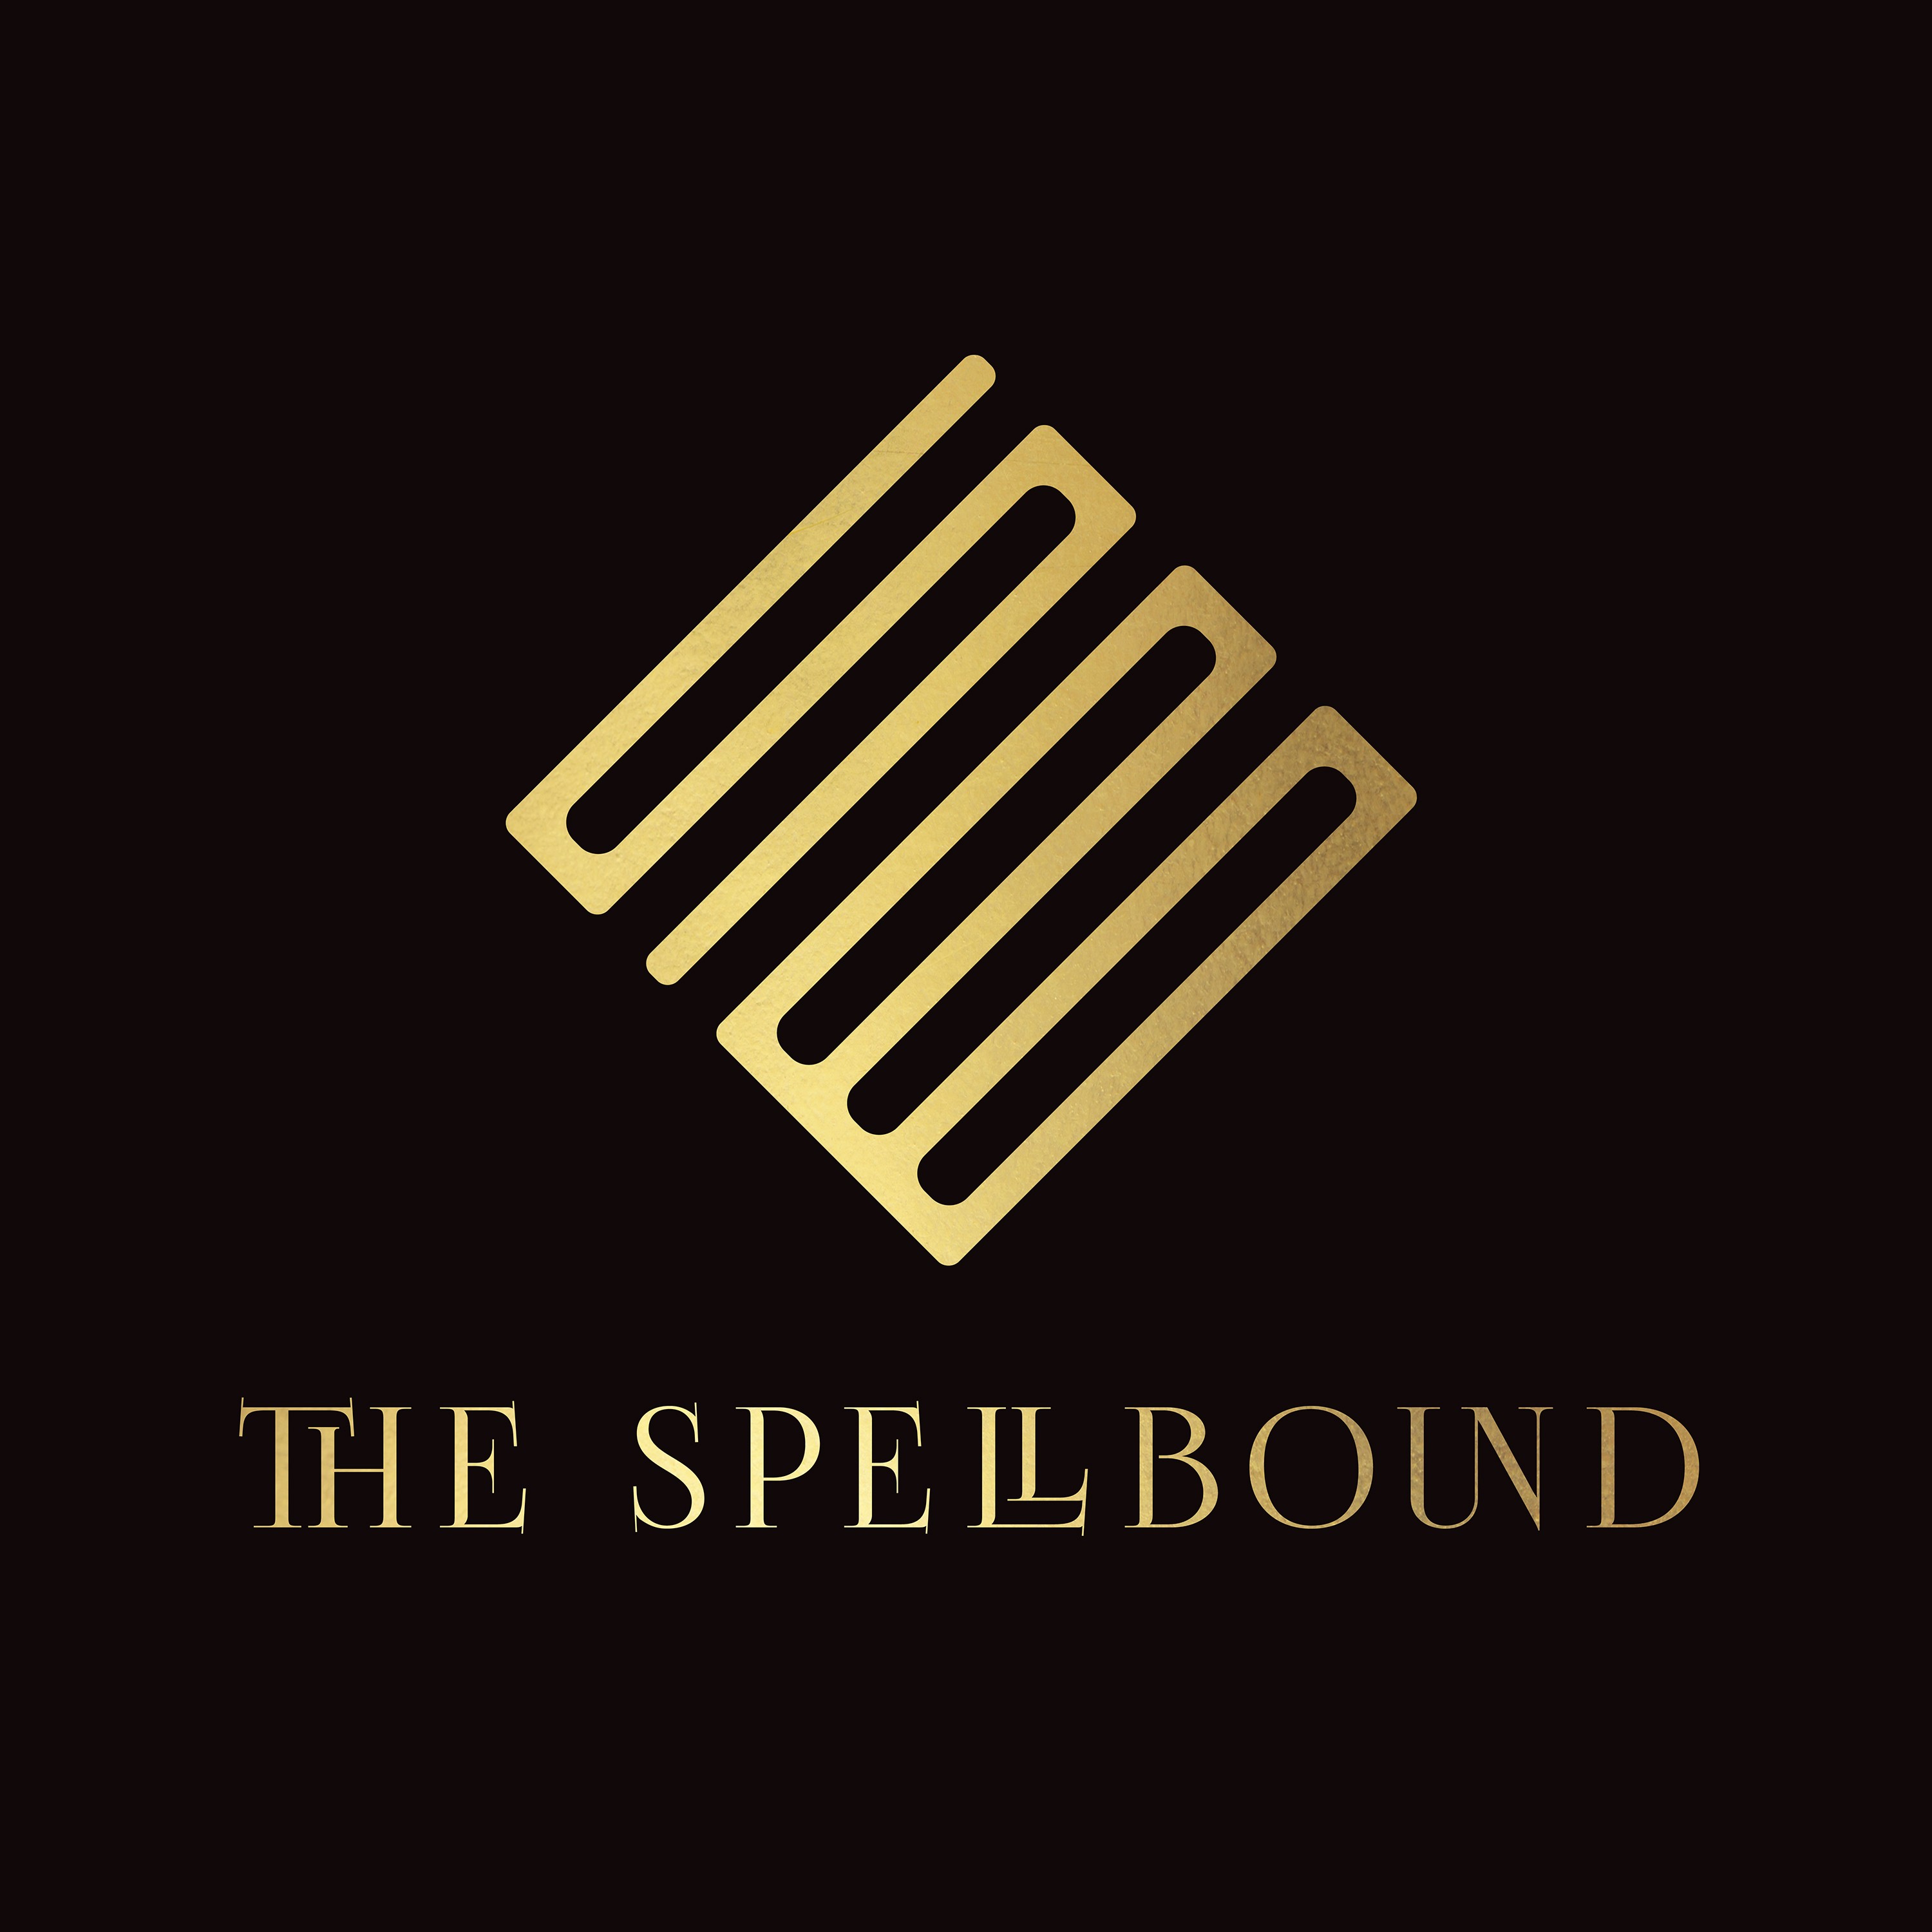 THE SPELLBOUND – THE SPELLBOUND [FLAC / WEB] [2022.02.23]